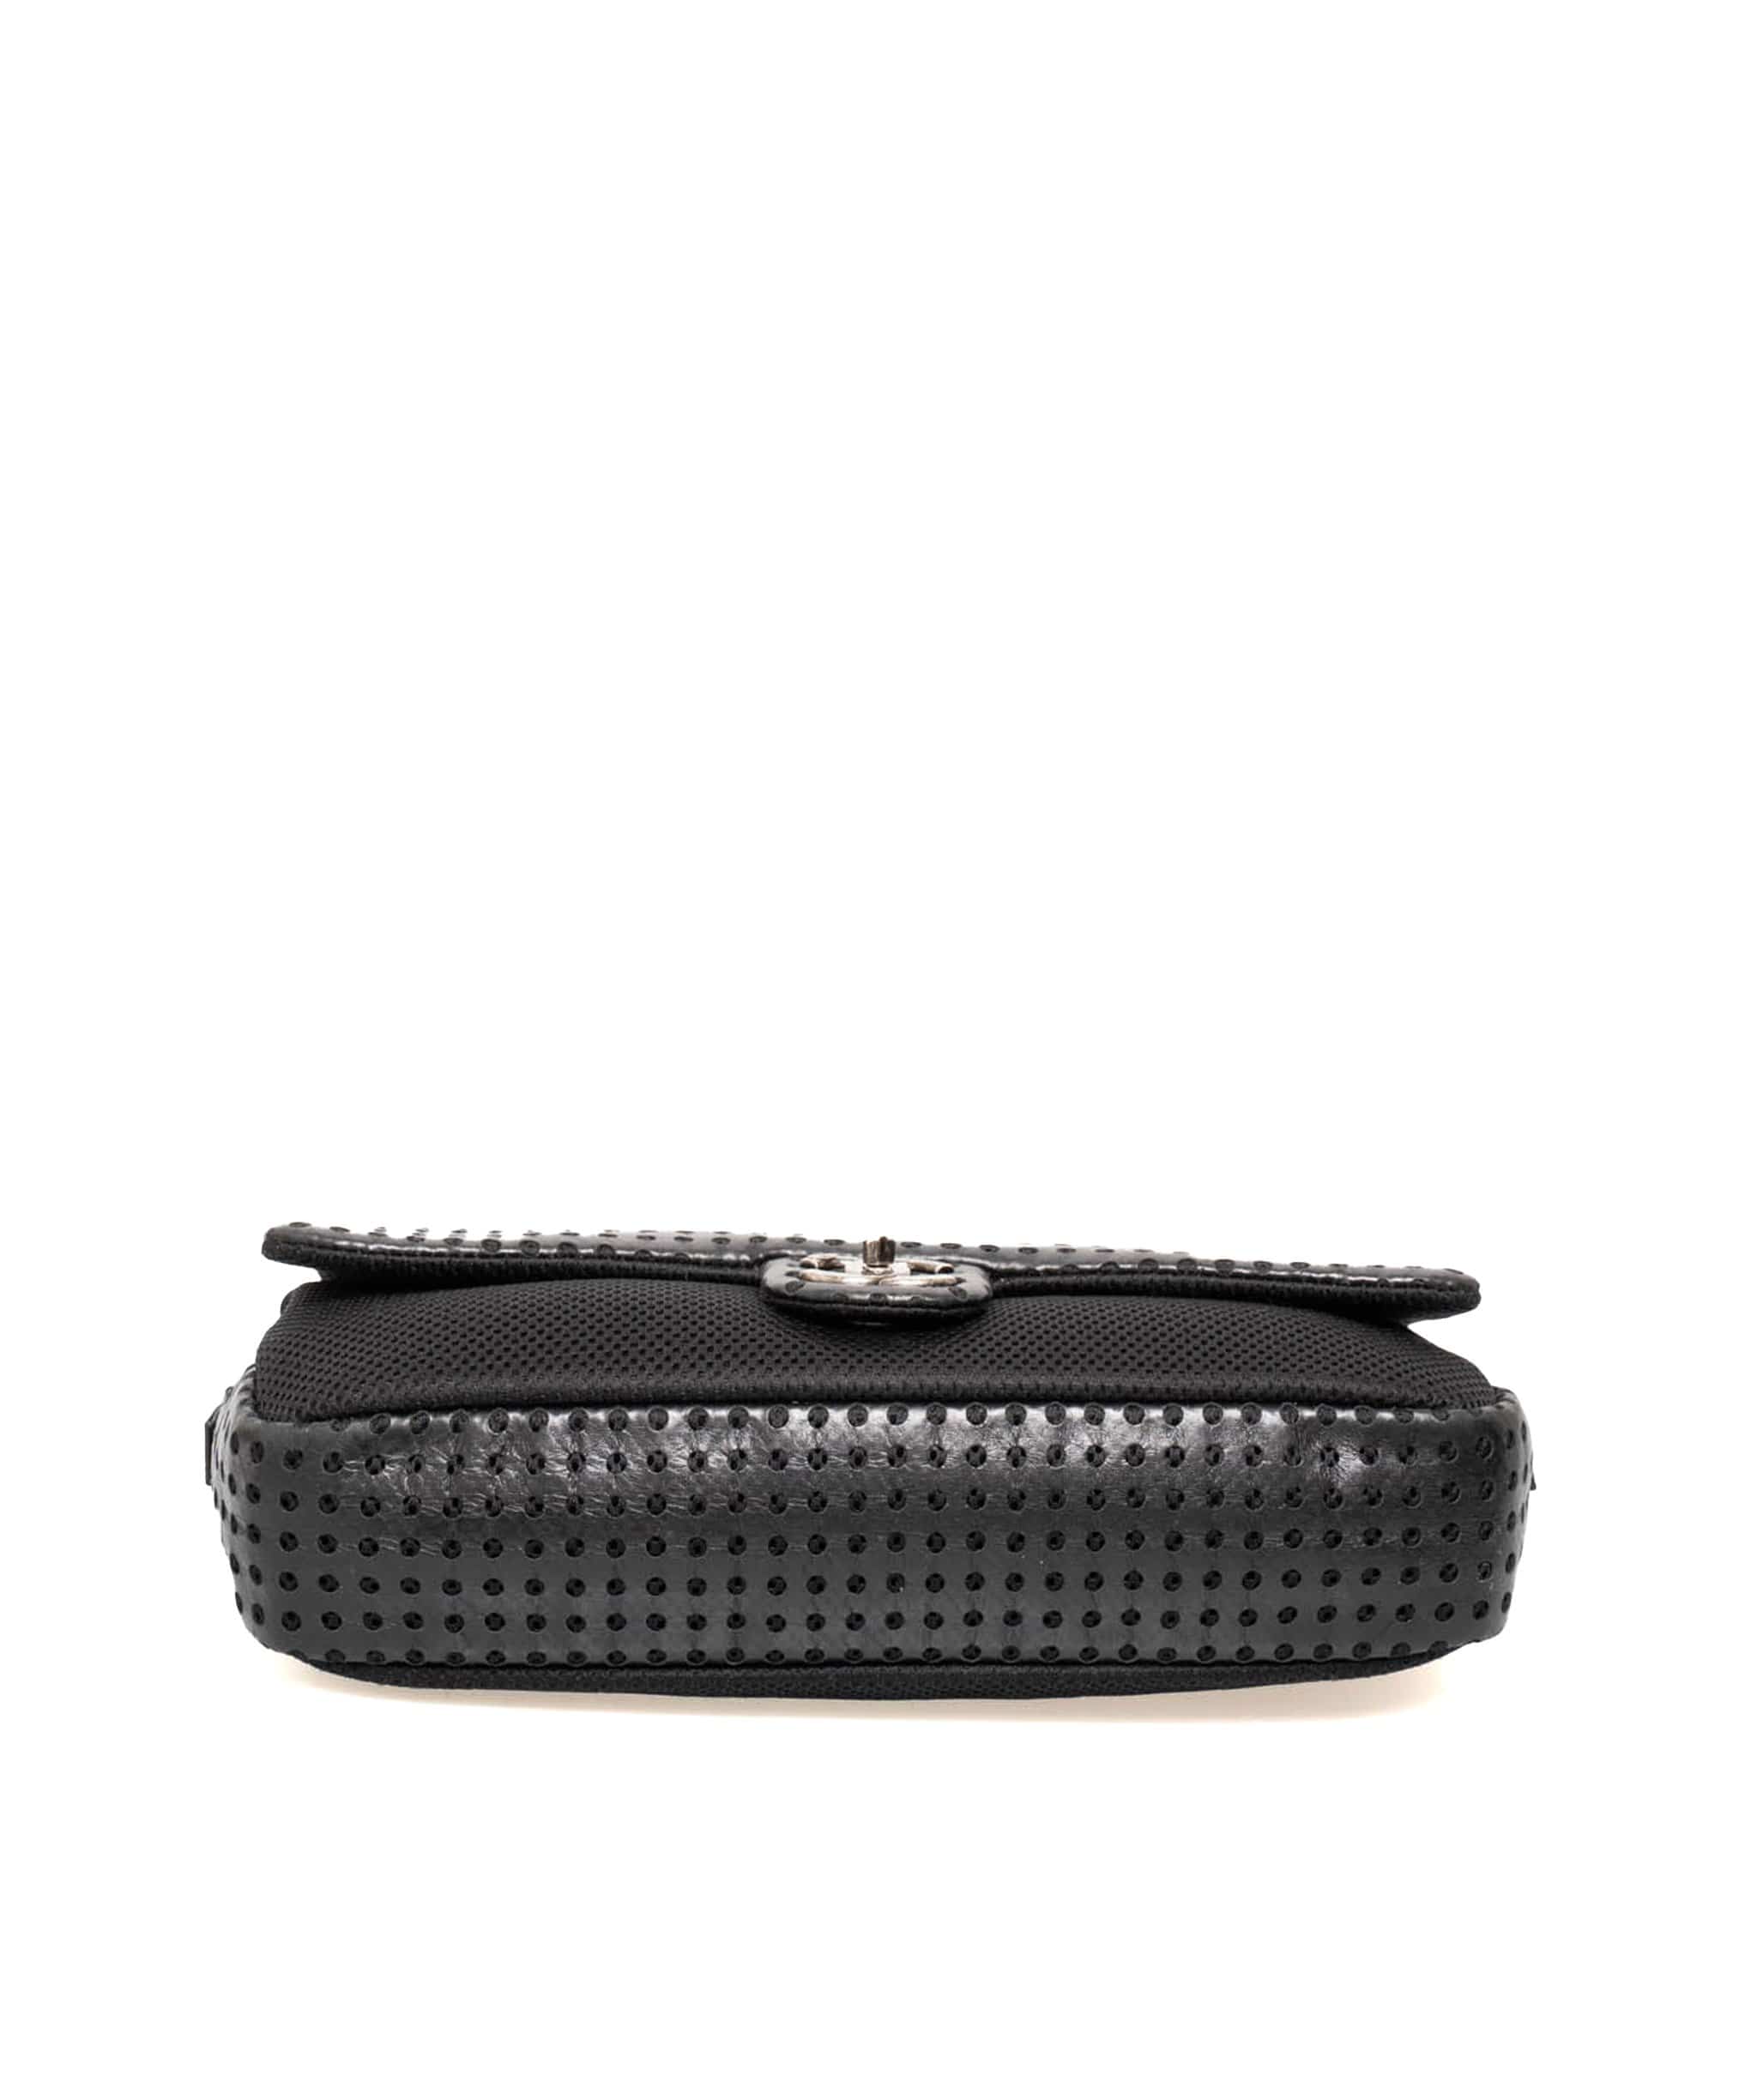 Chanel Chanel Perforated Flap Bag - ADL1549